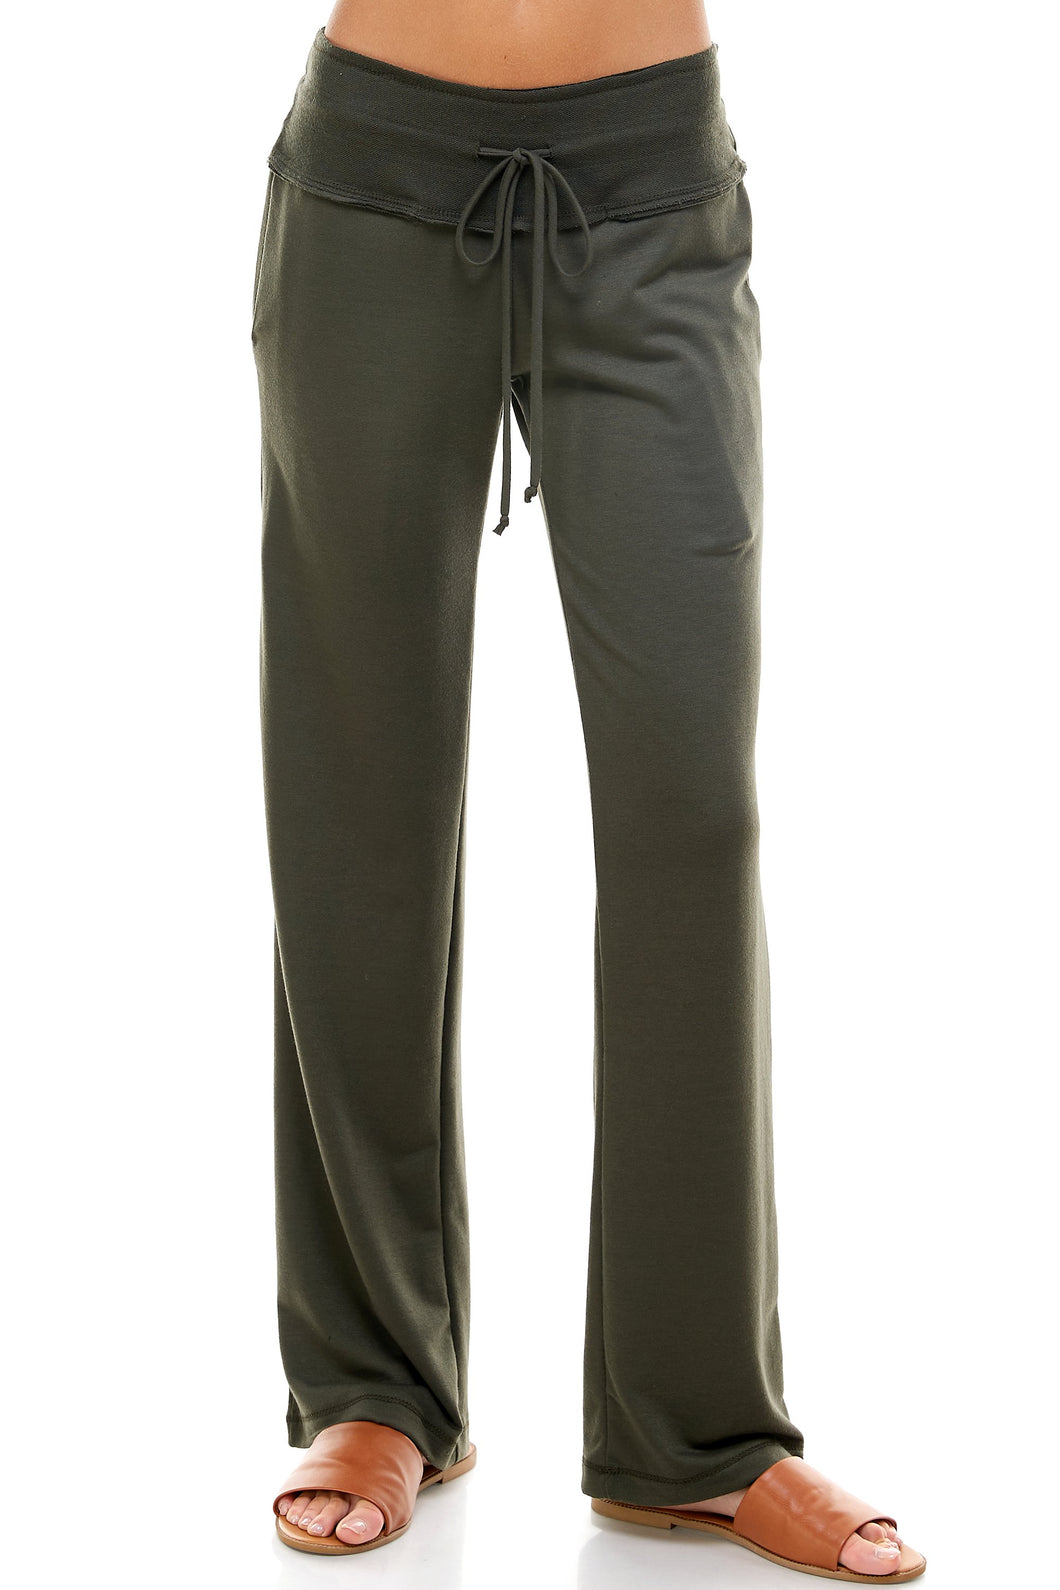 French Terry Lounge Pants - Olive